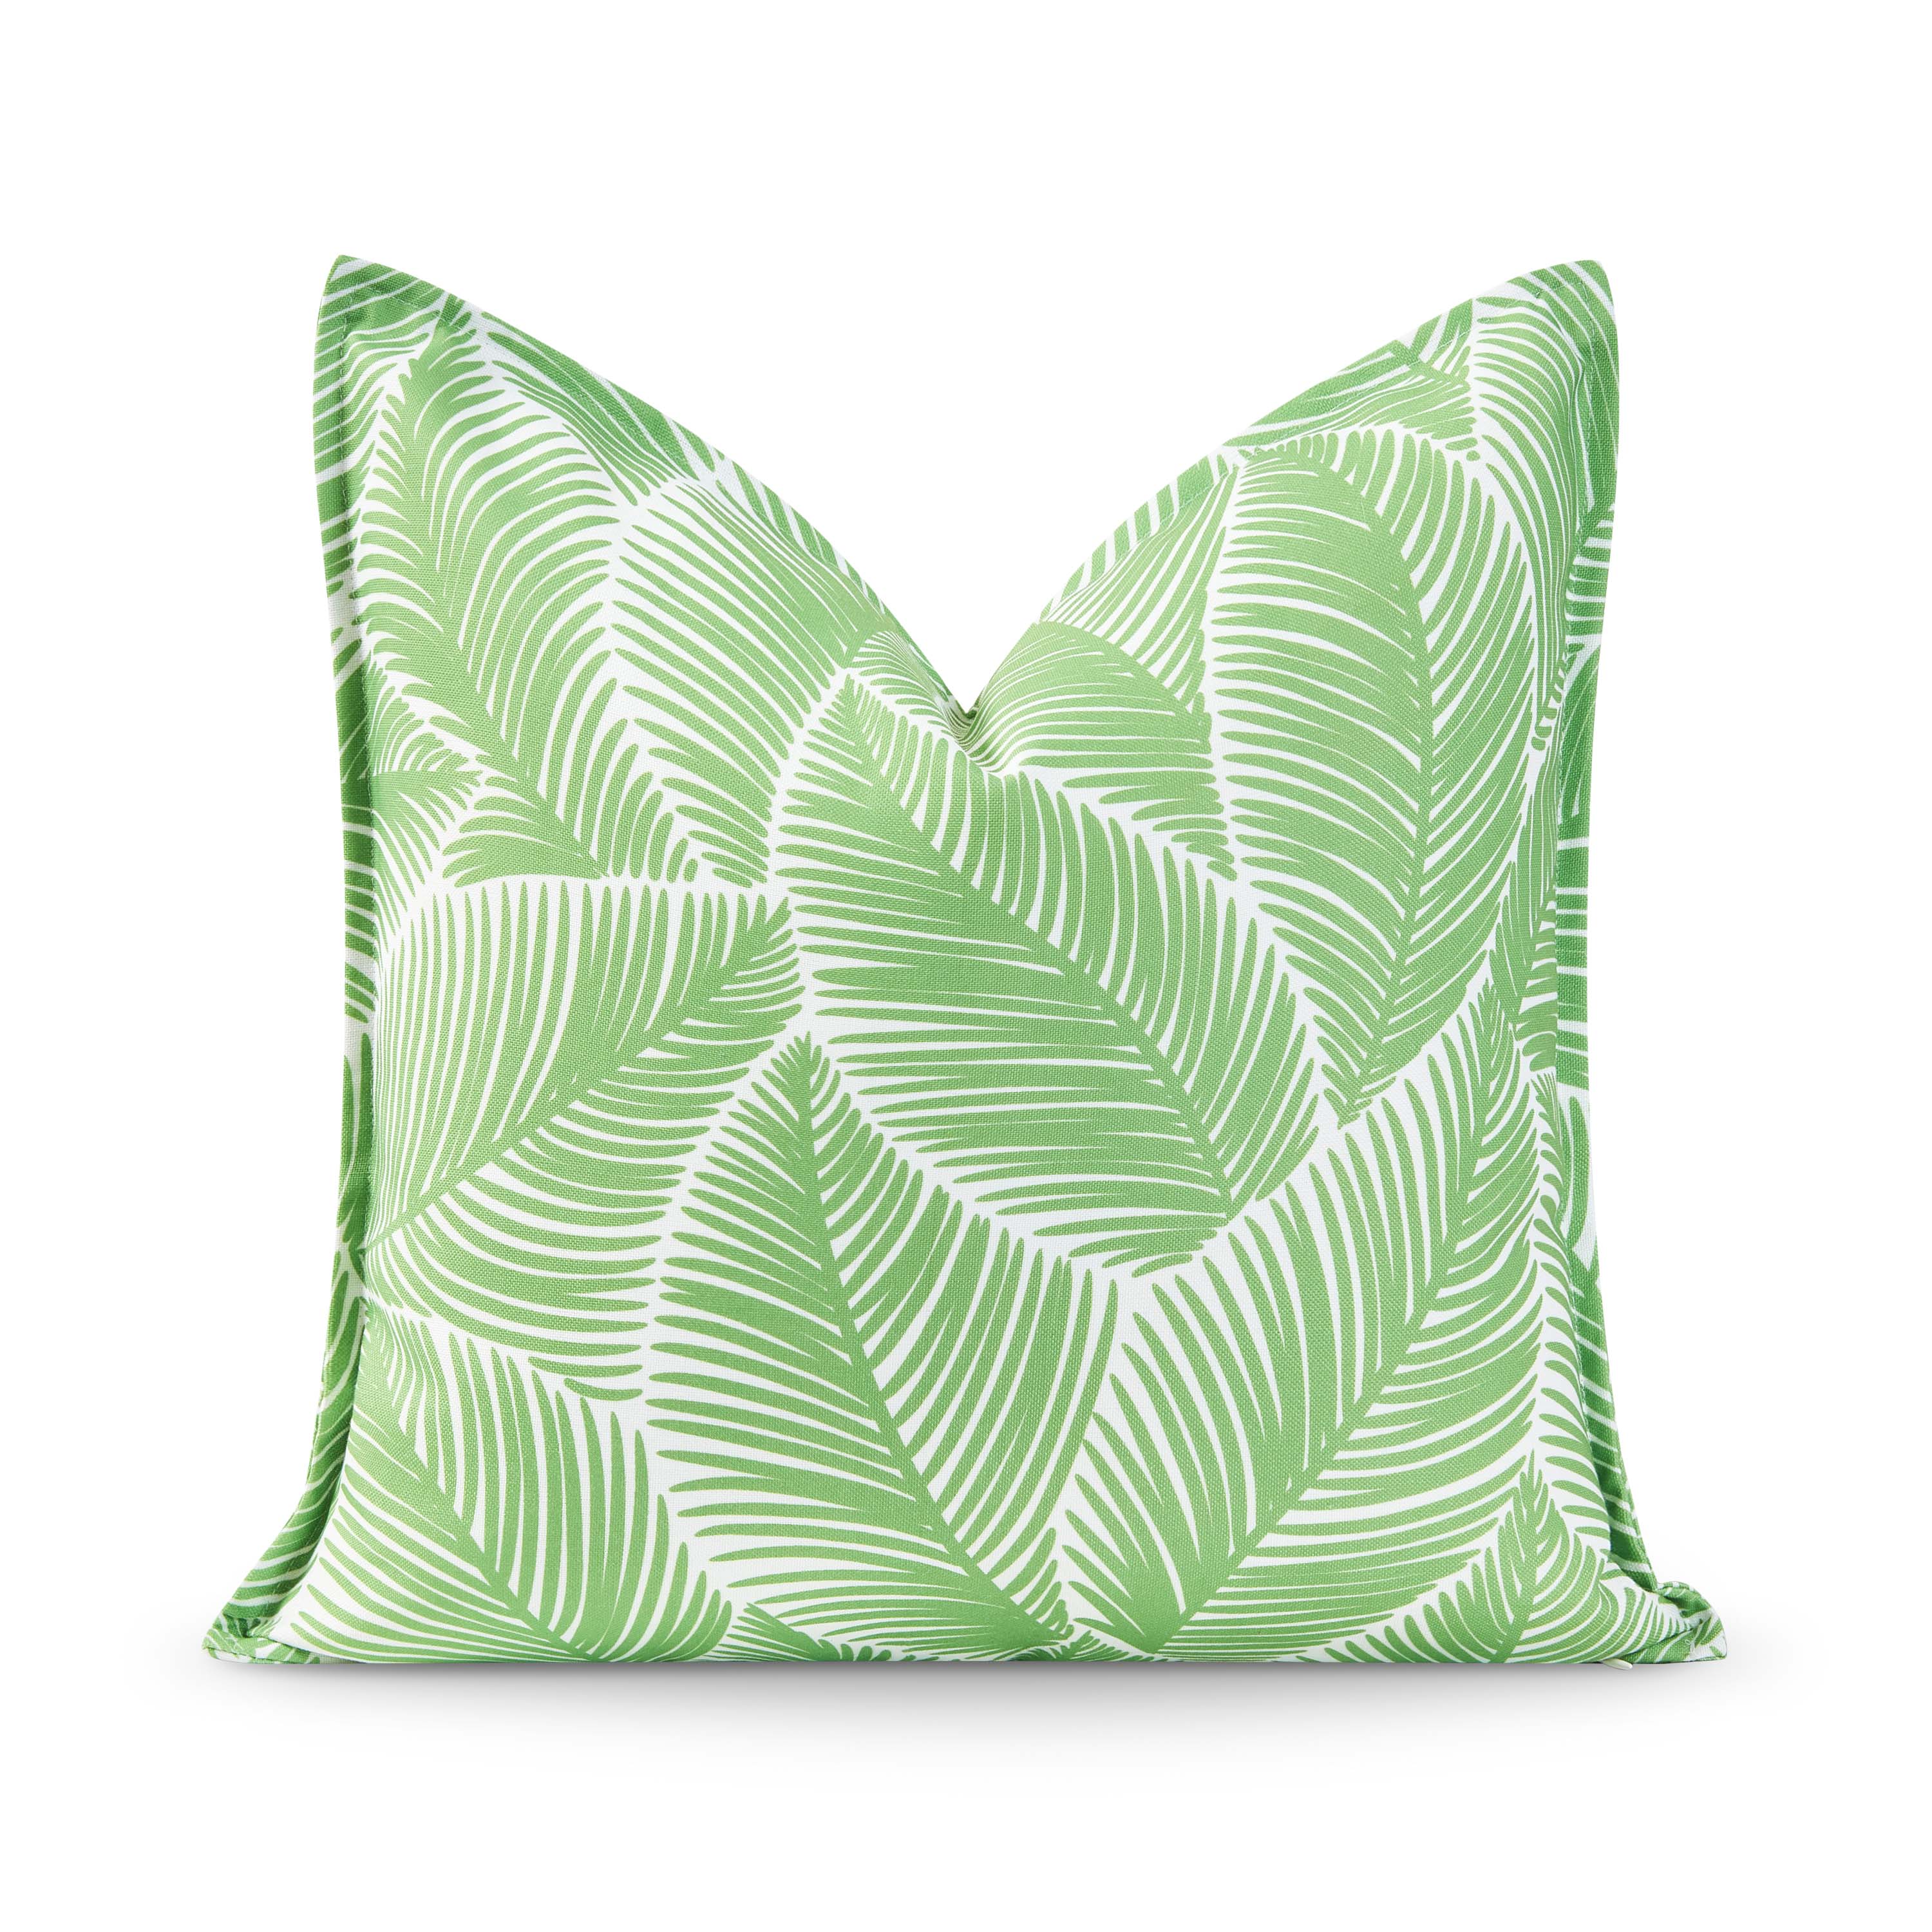 Coastal Indoor Outdoor Pillow Cover, Palm Leaf, Pale Green, 20"x20"